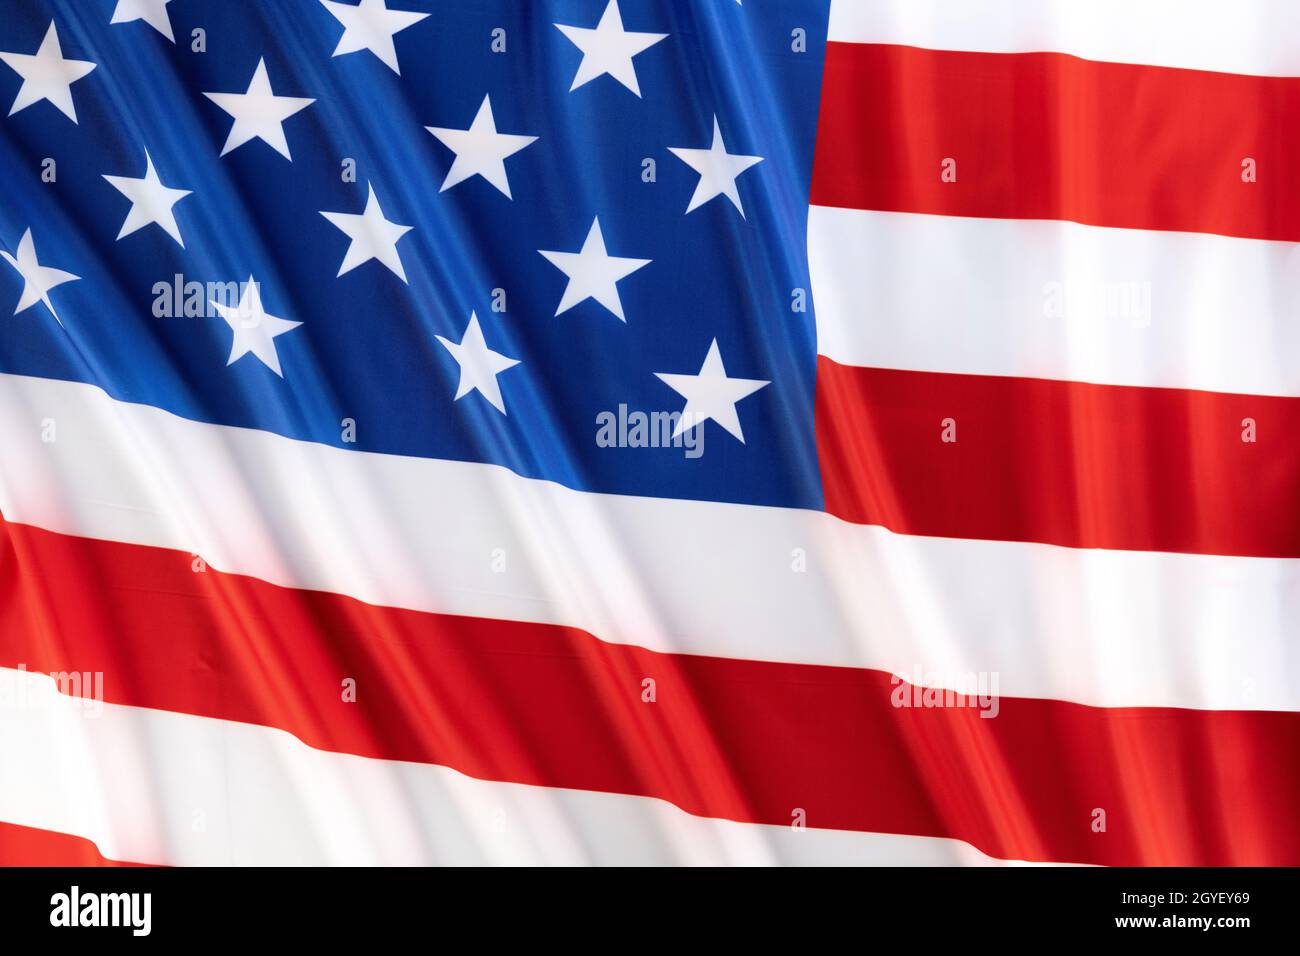 Old glory, the American national flag, a symbol of freedom and prosperity with its vibrant red, white and blue colors. Stock Photo